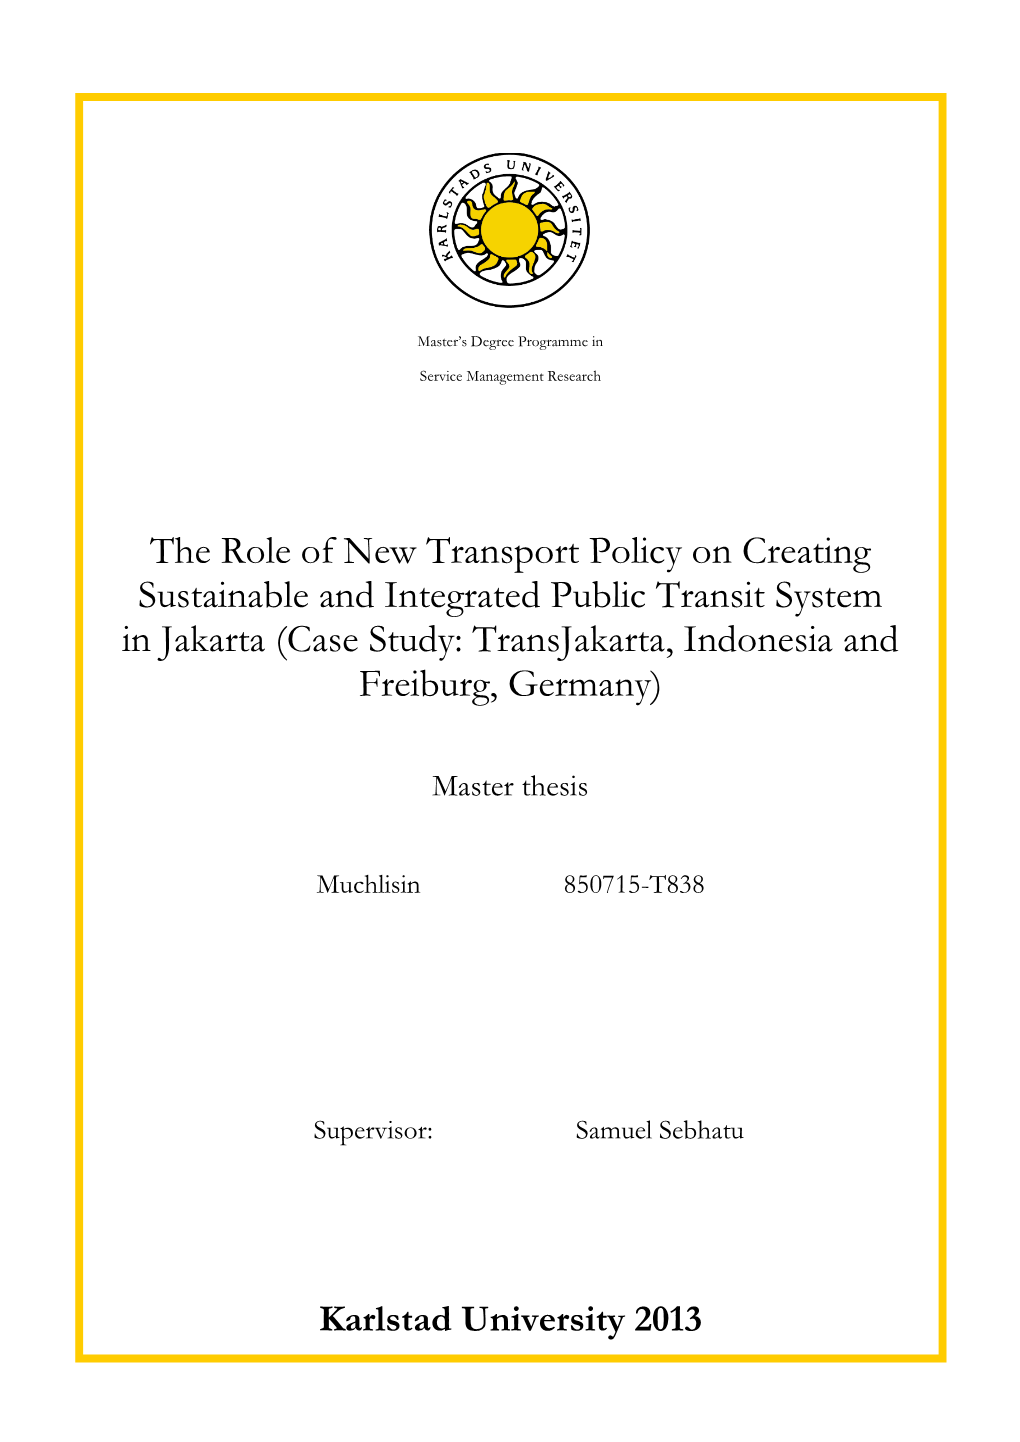 The Role of New Transport Policy on Creating Sustainable and Integrated Public Transit System in Jakarta (Case Study: Transjakarta, Indonesia and Freiburg, Germany)